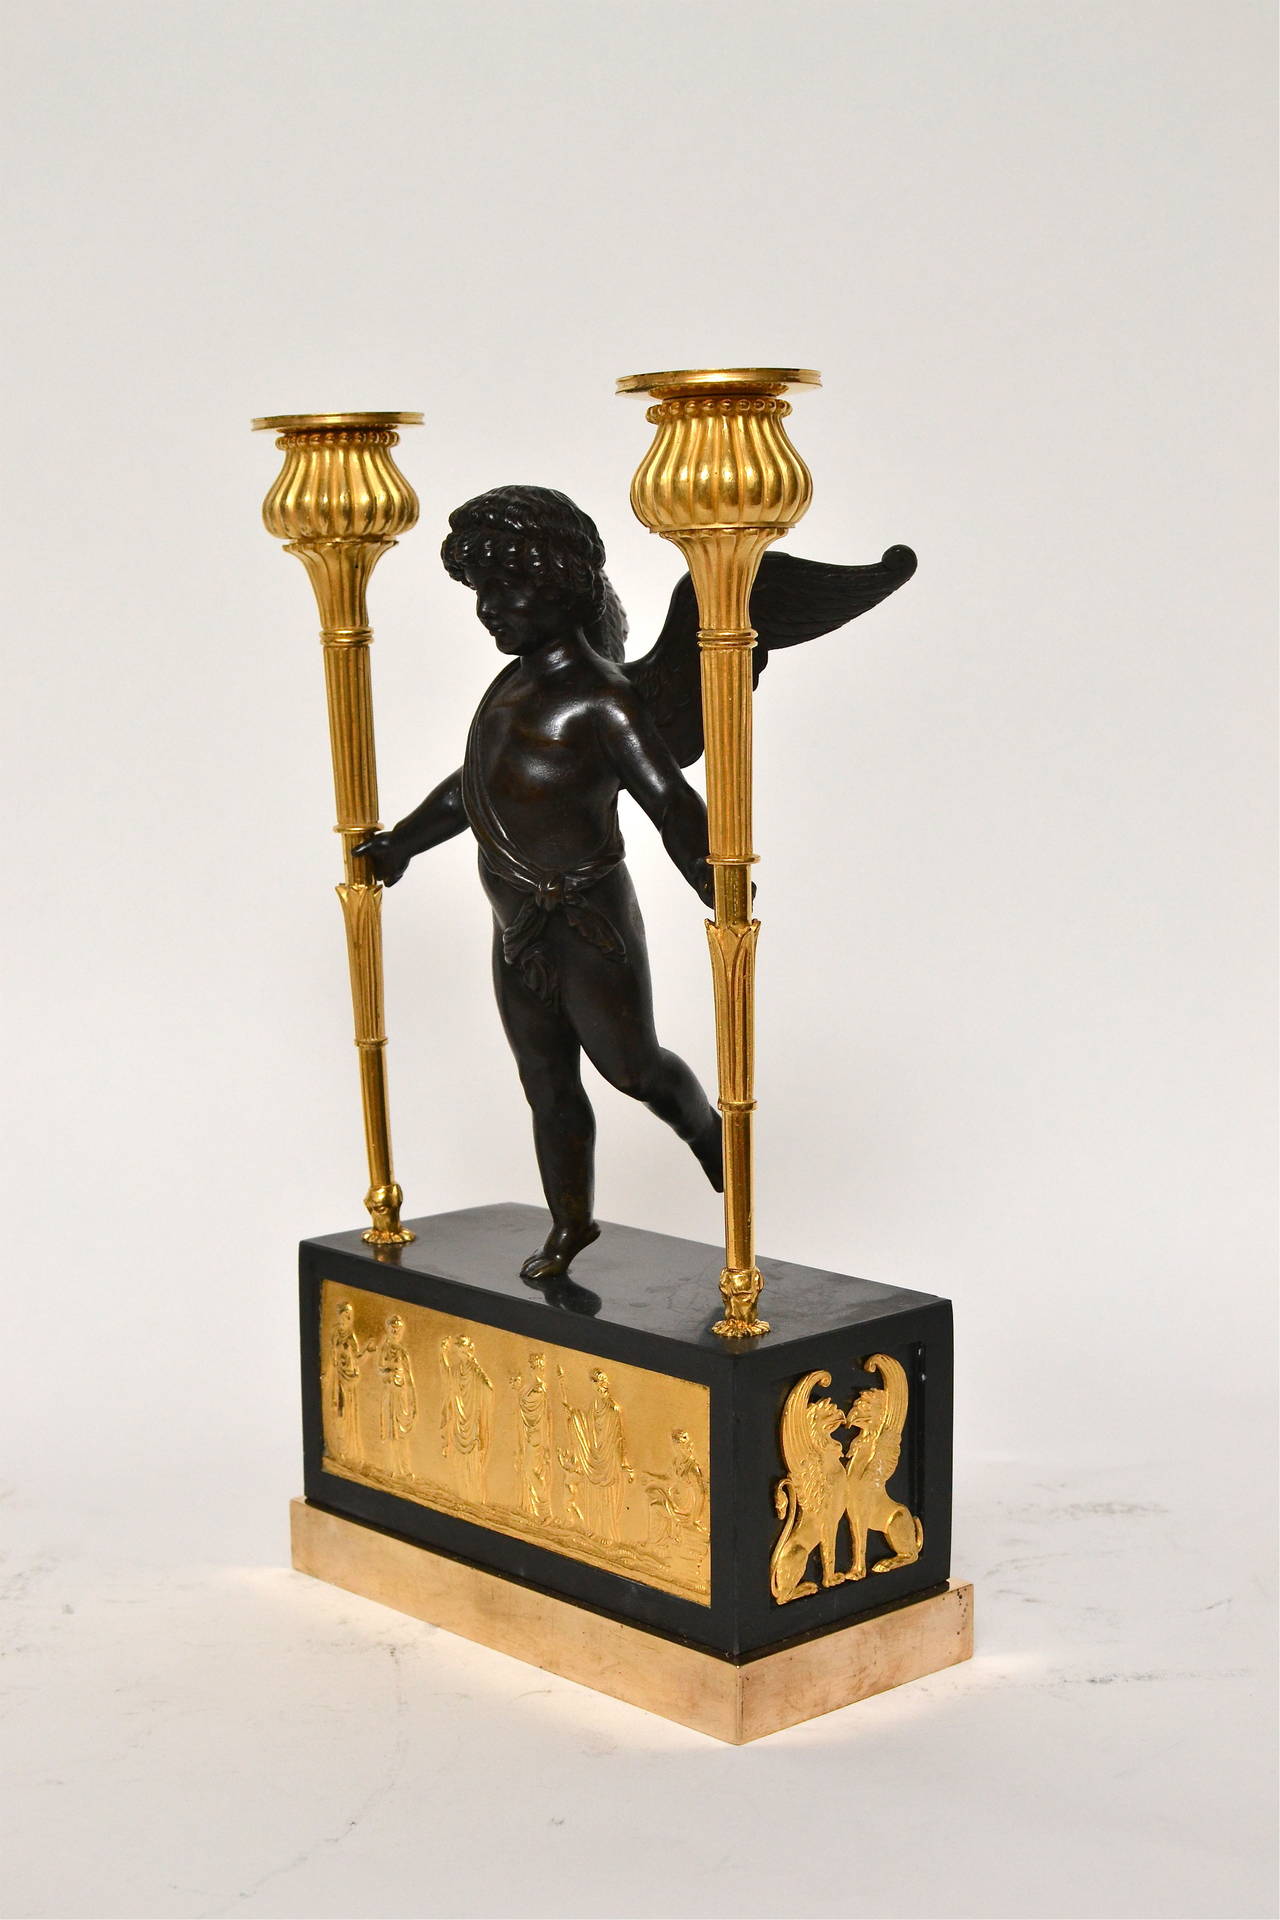 A pair of unusual Empire gilt bronze and black marble candelabra, possibly English, circa 1825.